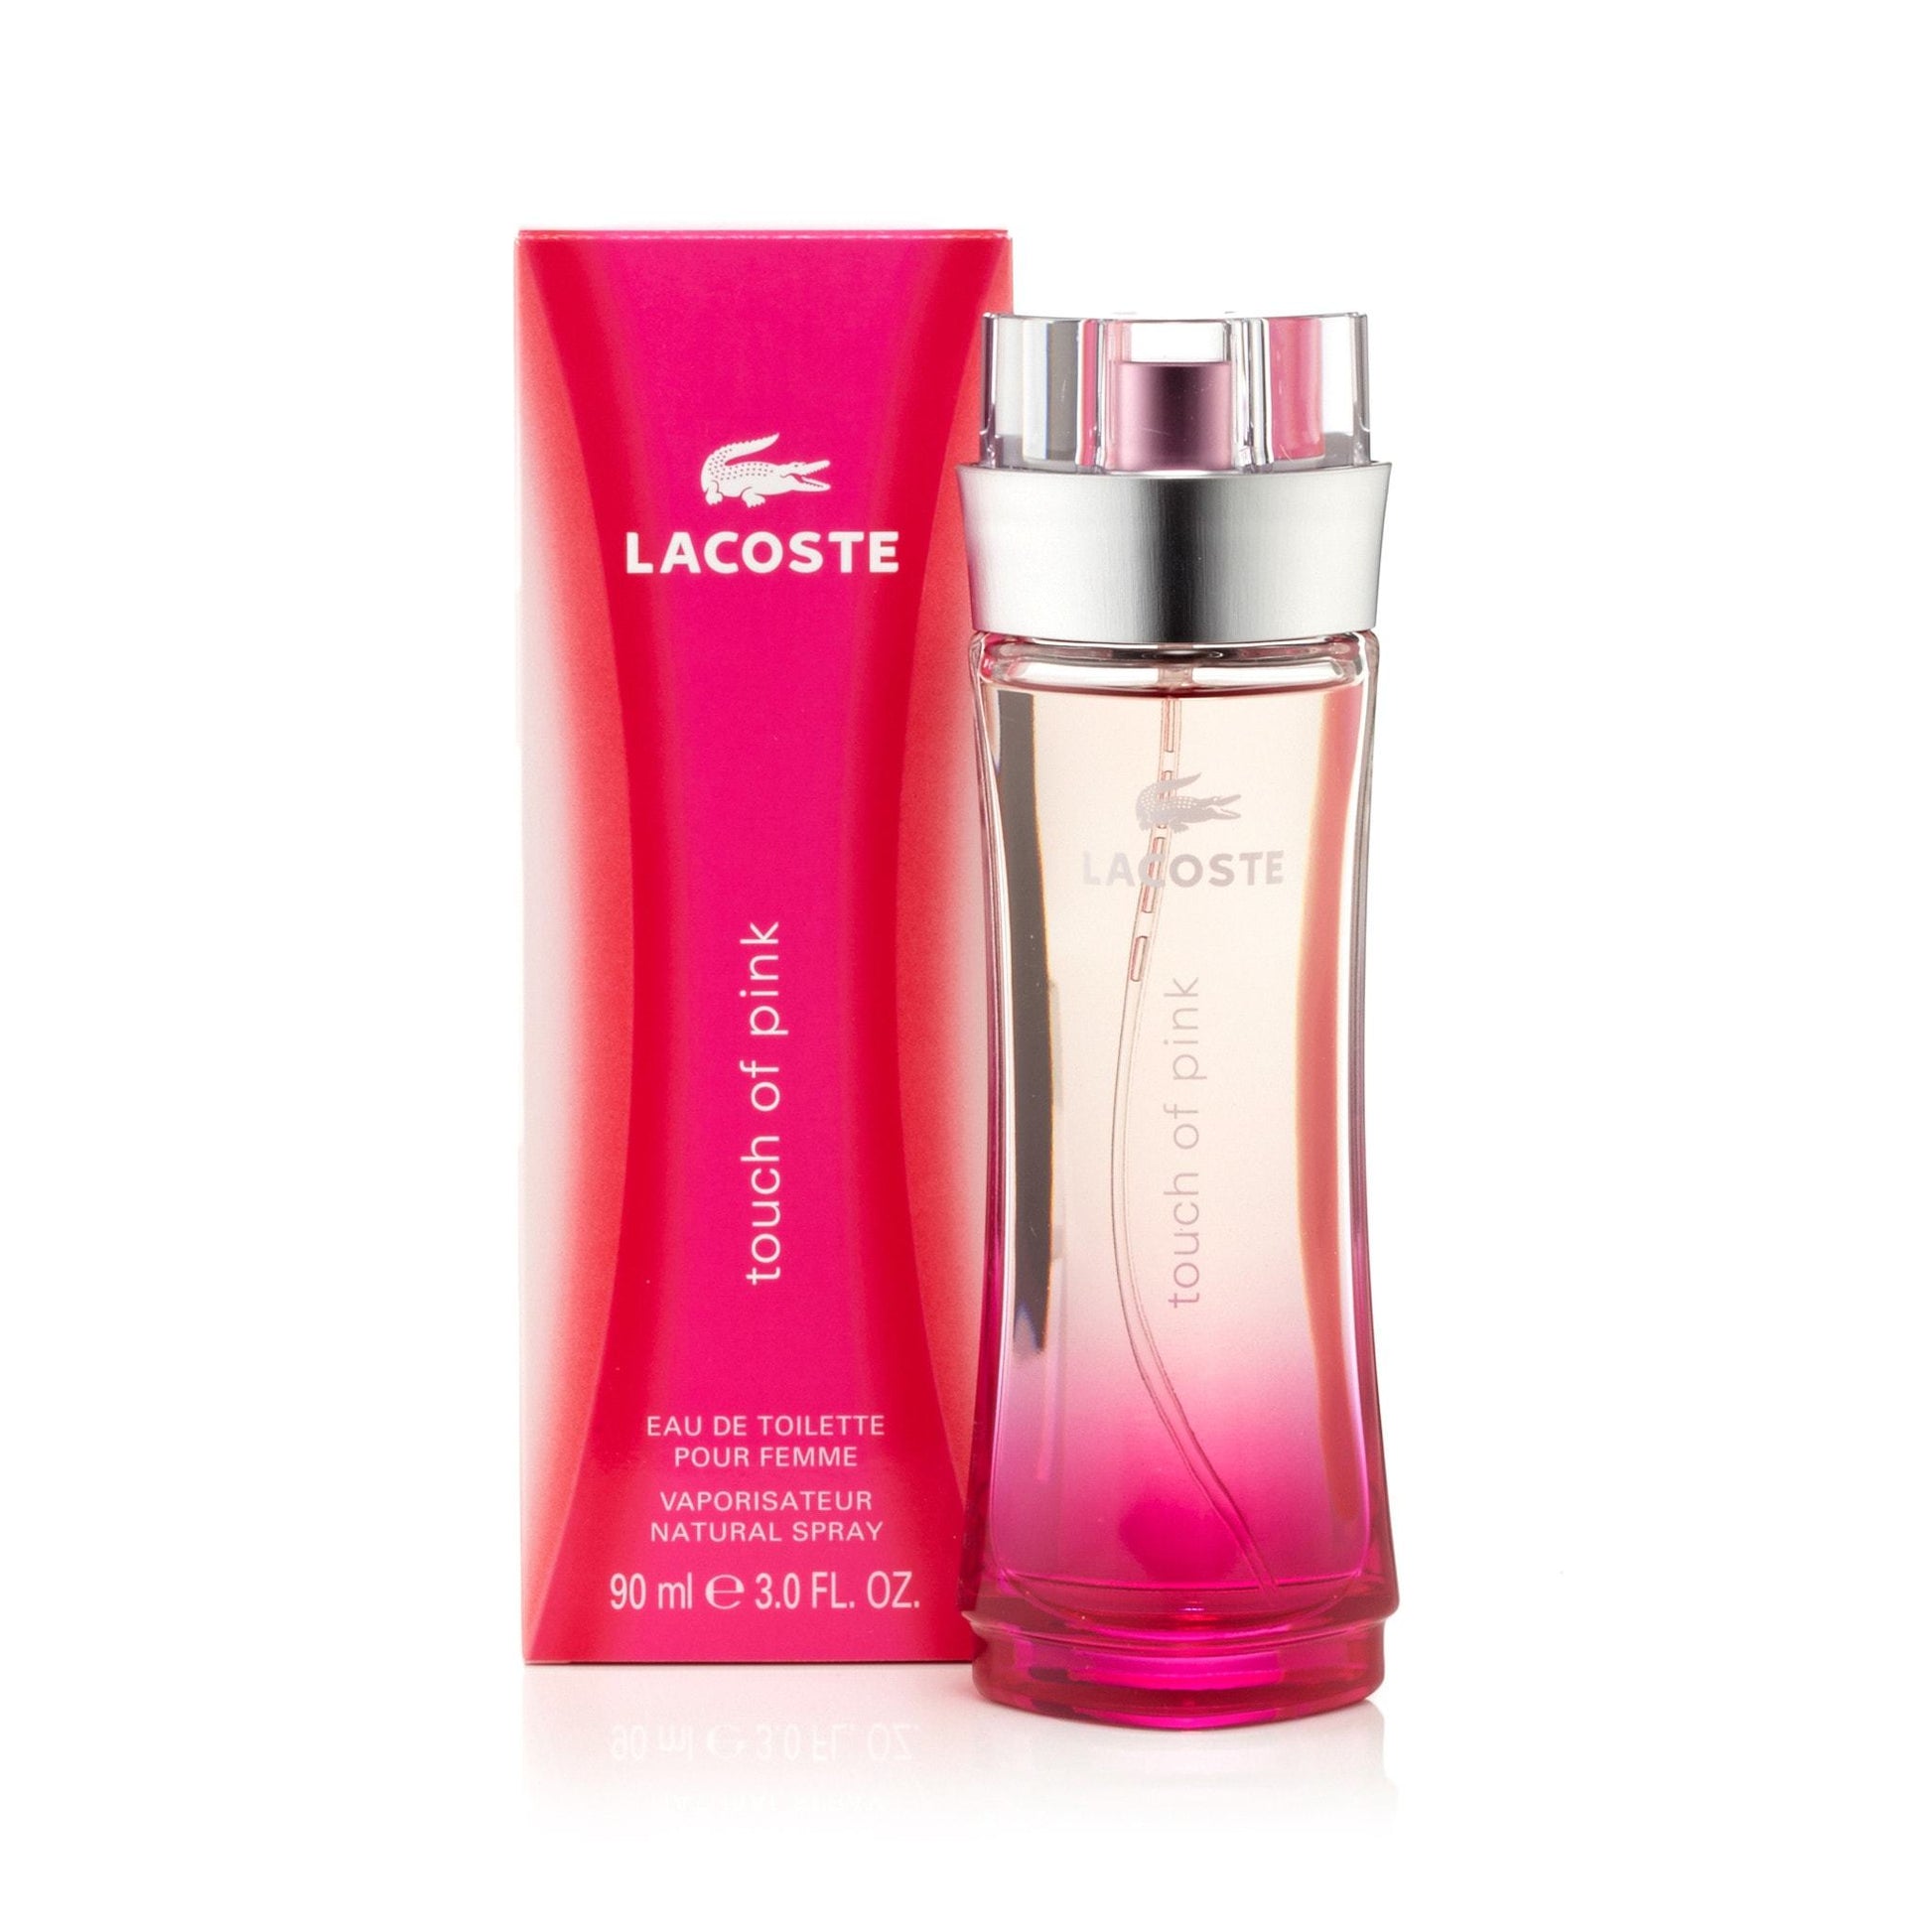 Touch of Pink Eau de Toilette Spray for Women by Lacoste, Product image 1